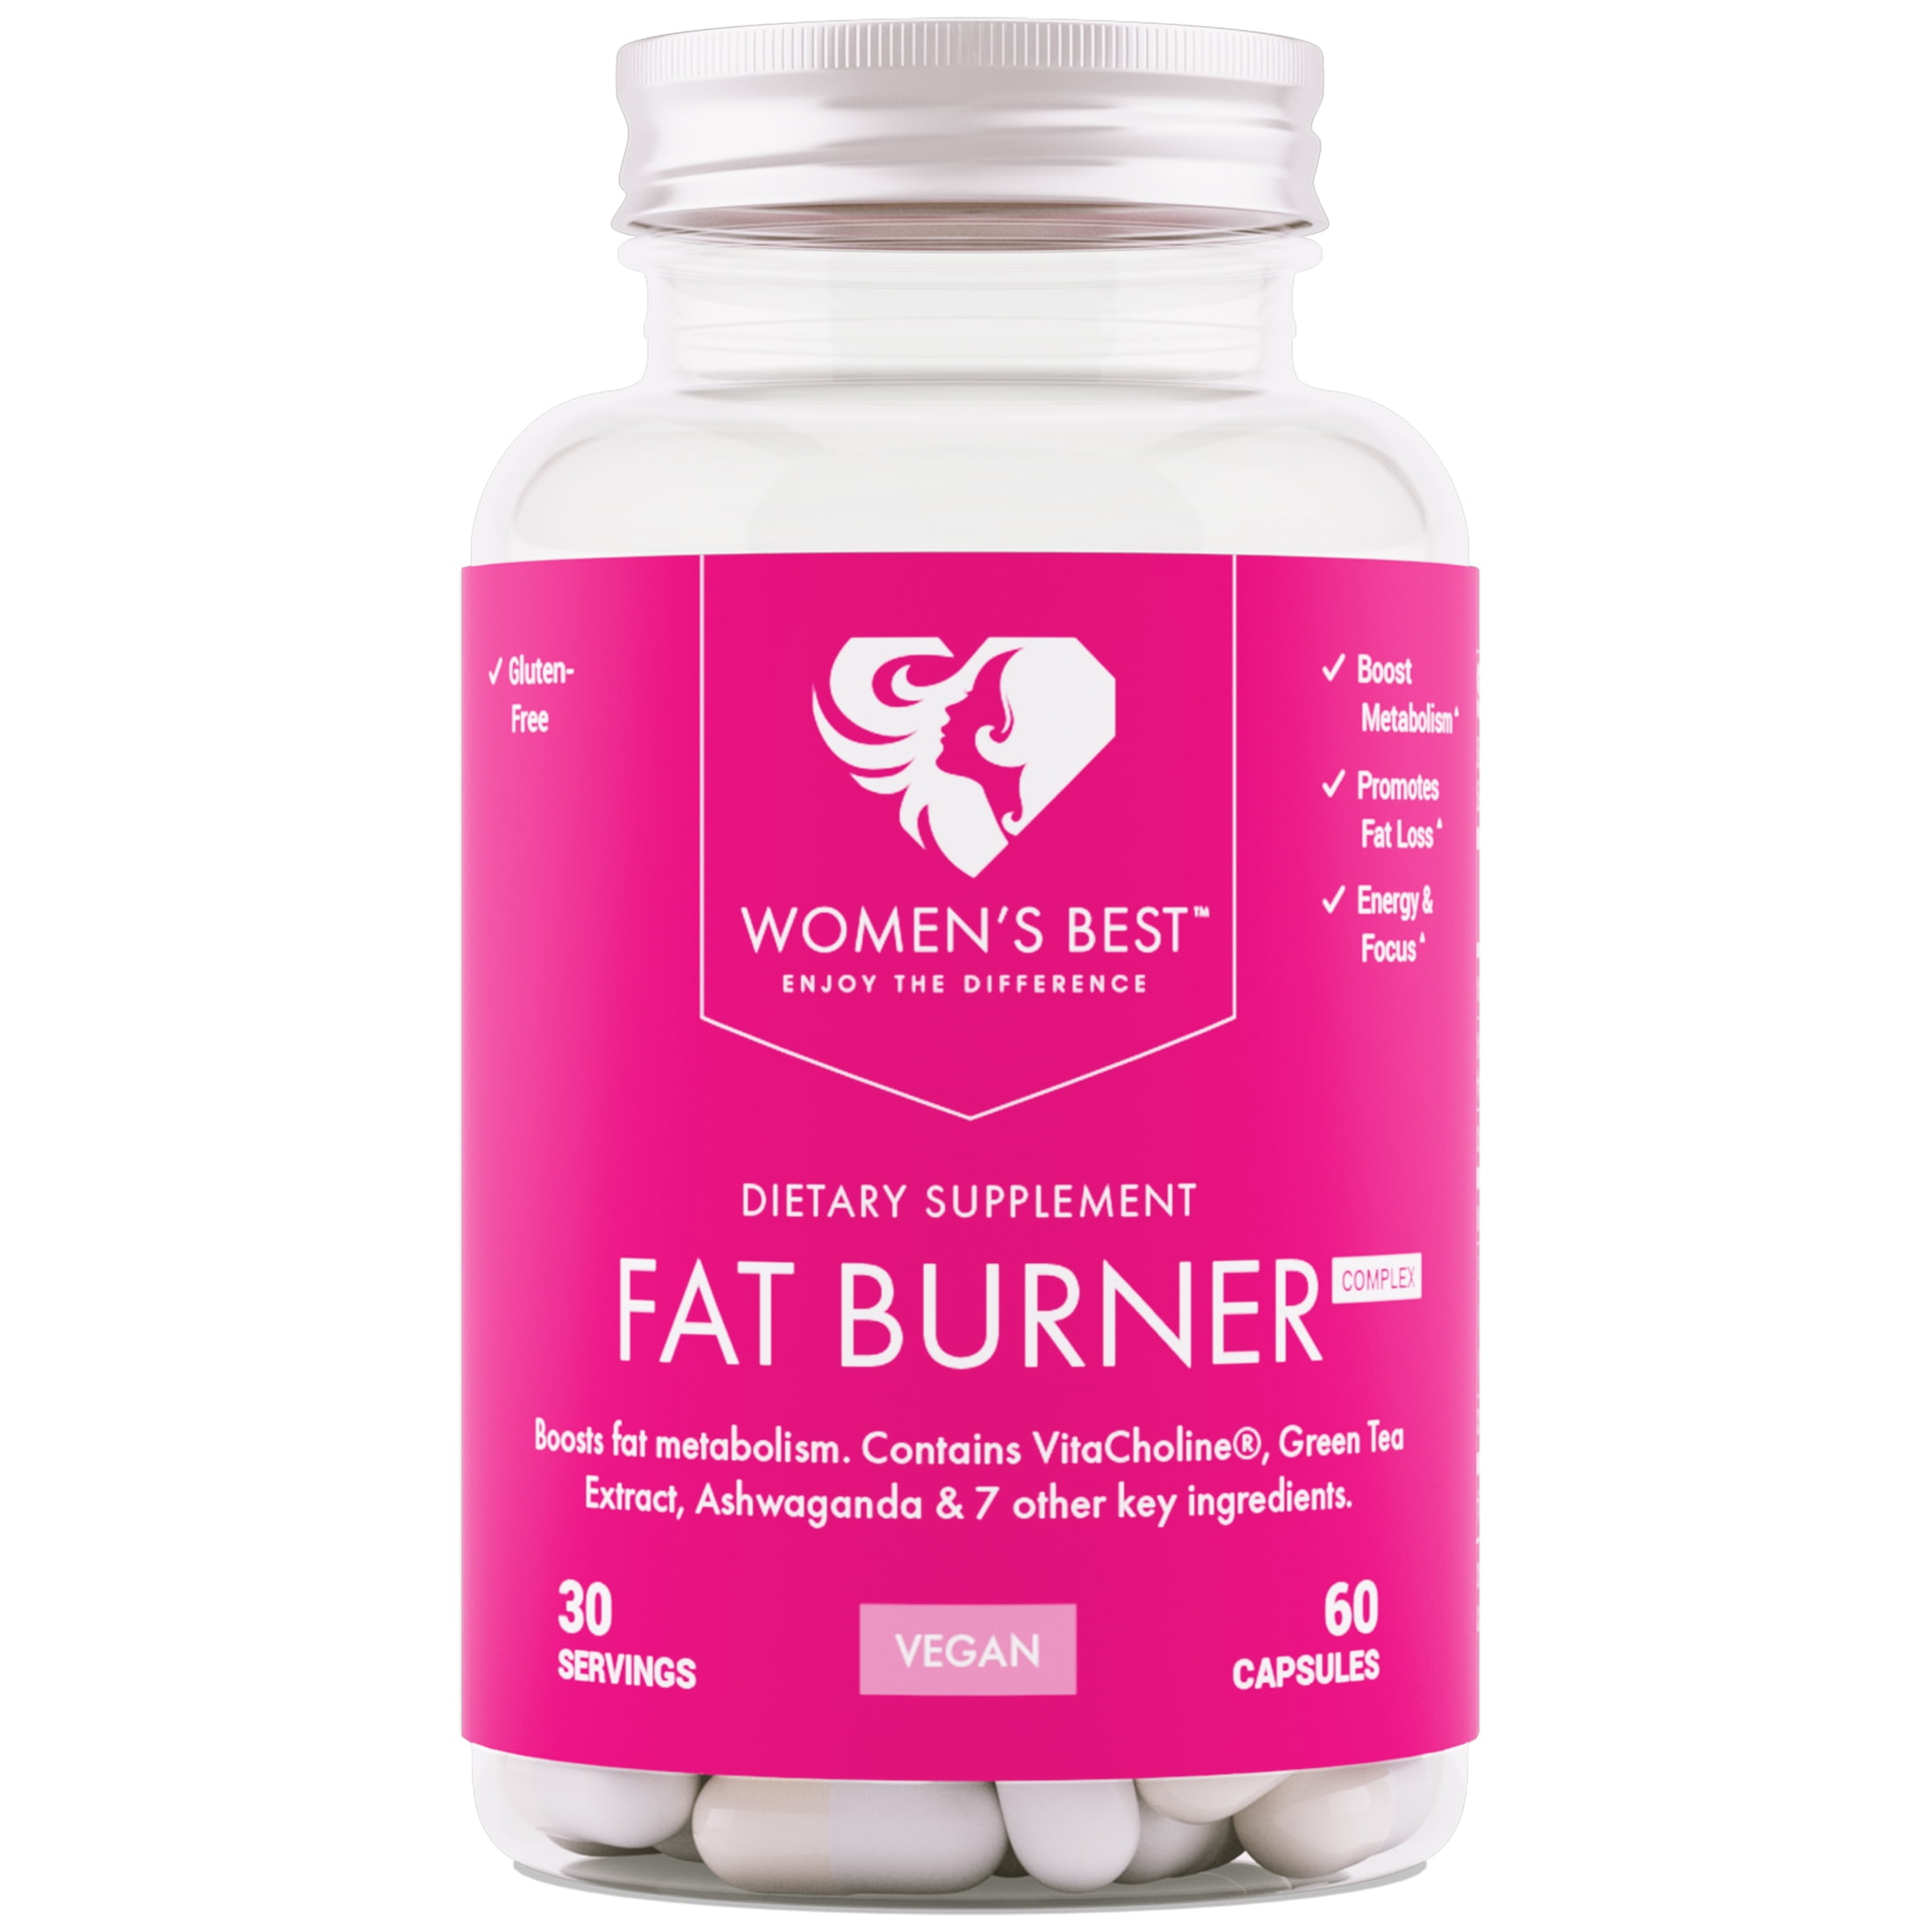 Women's Best Fat Burner Weight Loss Capsules, 60 Count